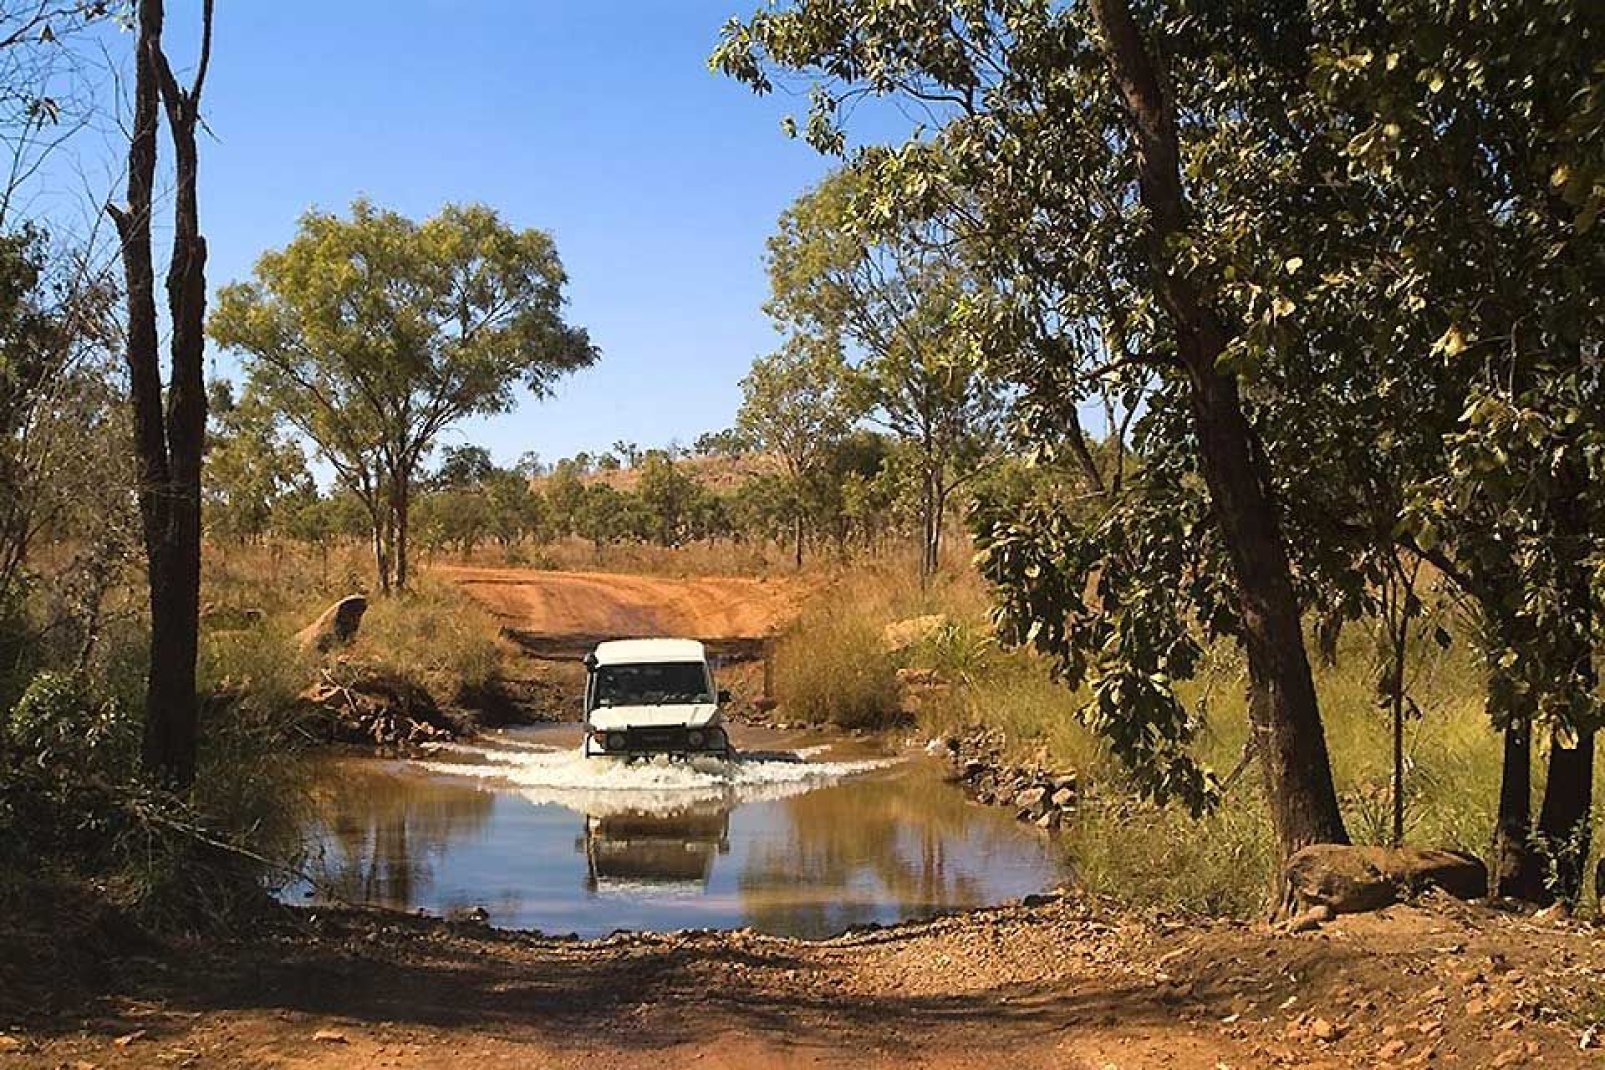 The Gibb River Road is one of Kimberley's main attractions, giving visitors the opportunity to dive into a scenery of spectacular gorges, rock pools, and extraordinary waterfalls.